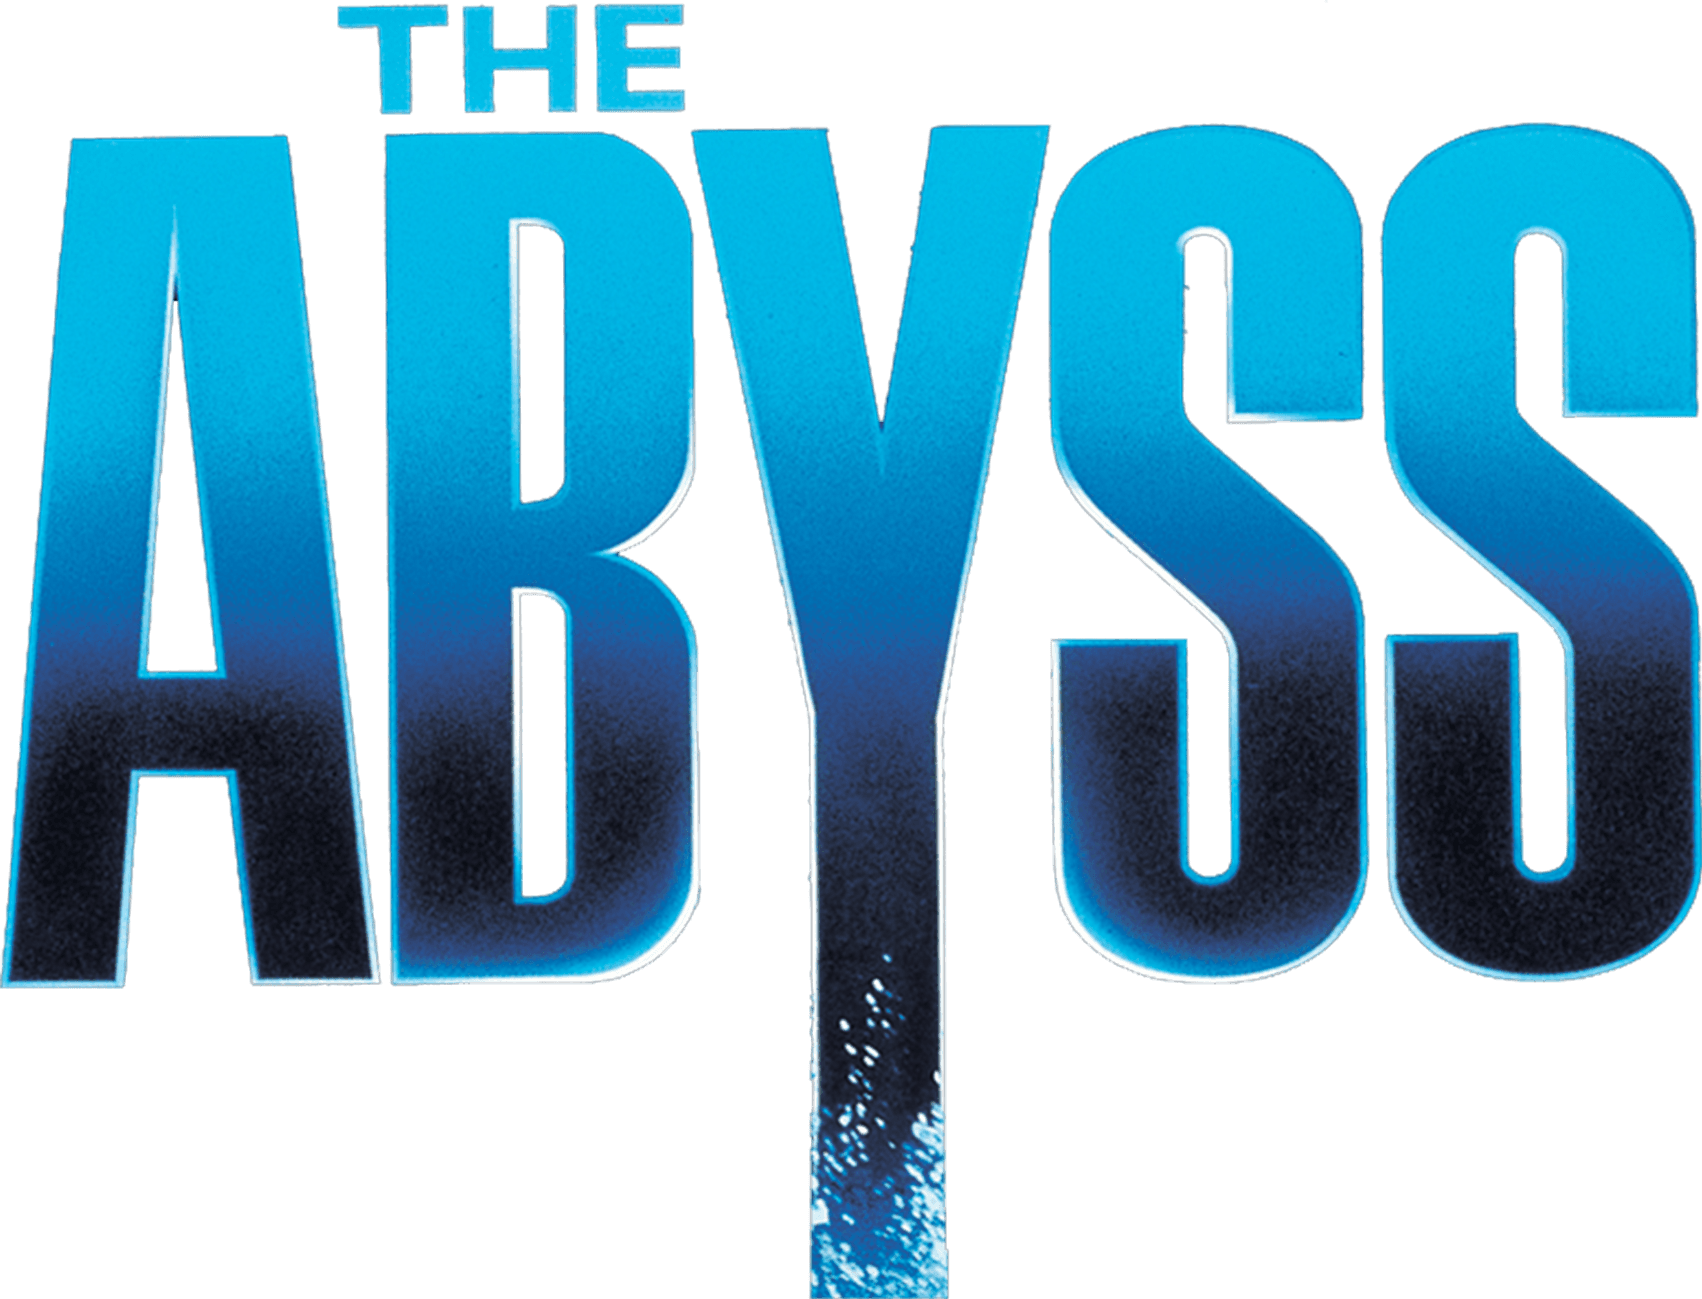 The Abyss logo